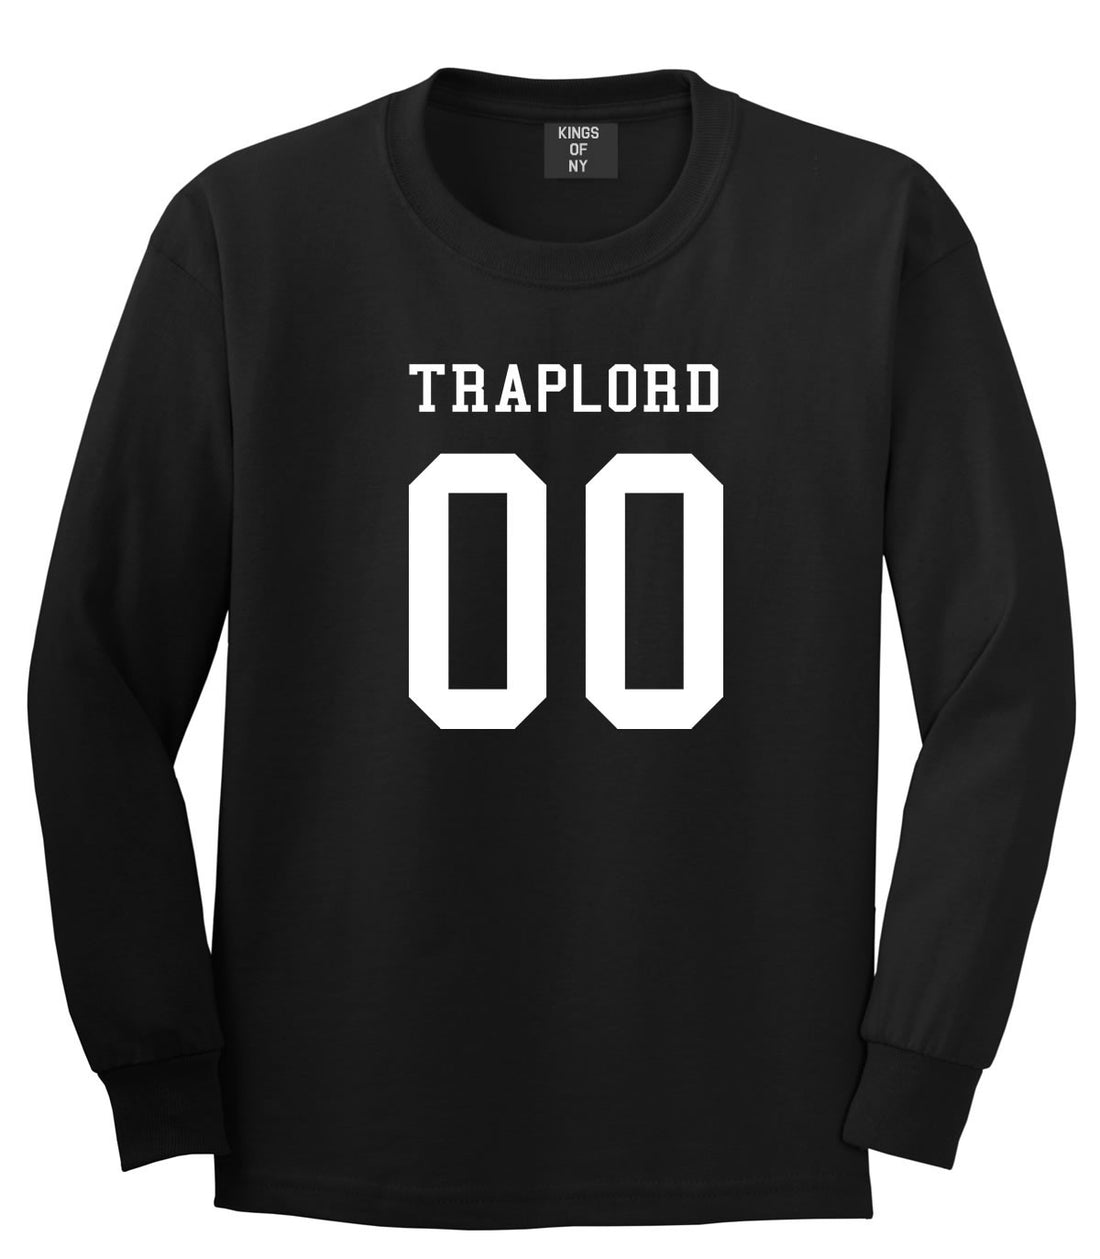 Traplord Team Jersey 00 Trap Lord Long Sleeve T-Shirt in Black By Kings Of NY